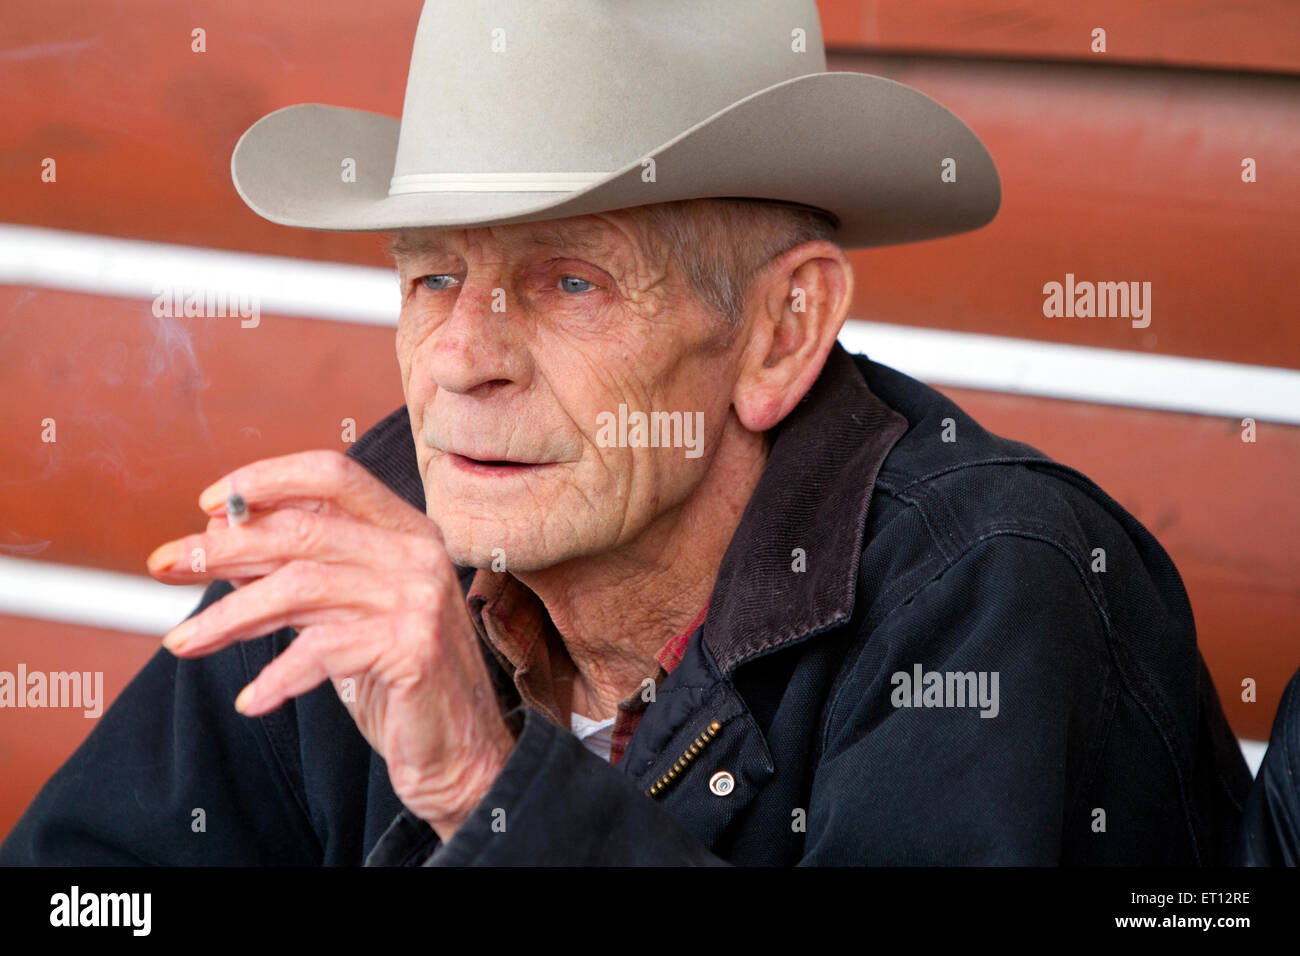 Old farmer smoking a cigarette outside a cafe in eastern Idaho, USA. Stock Photo